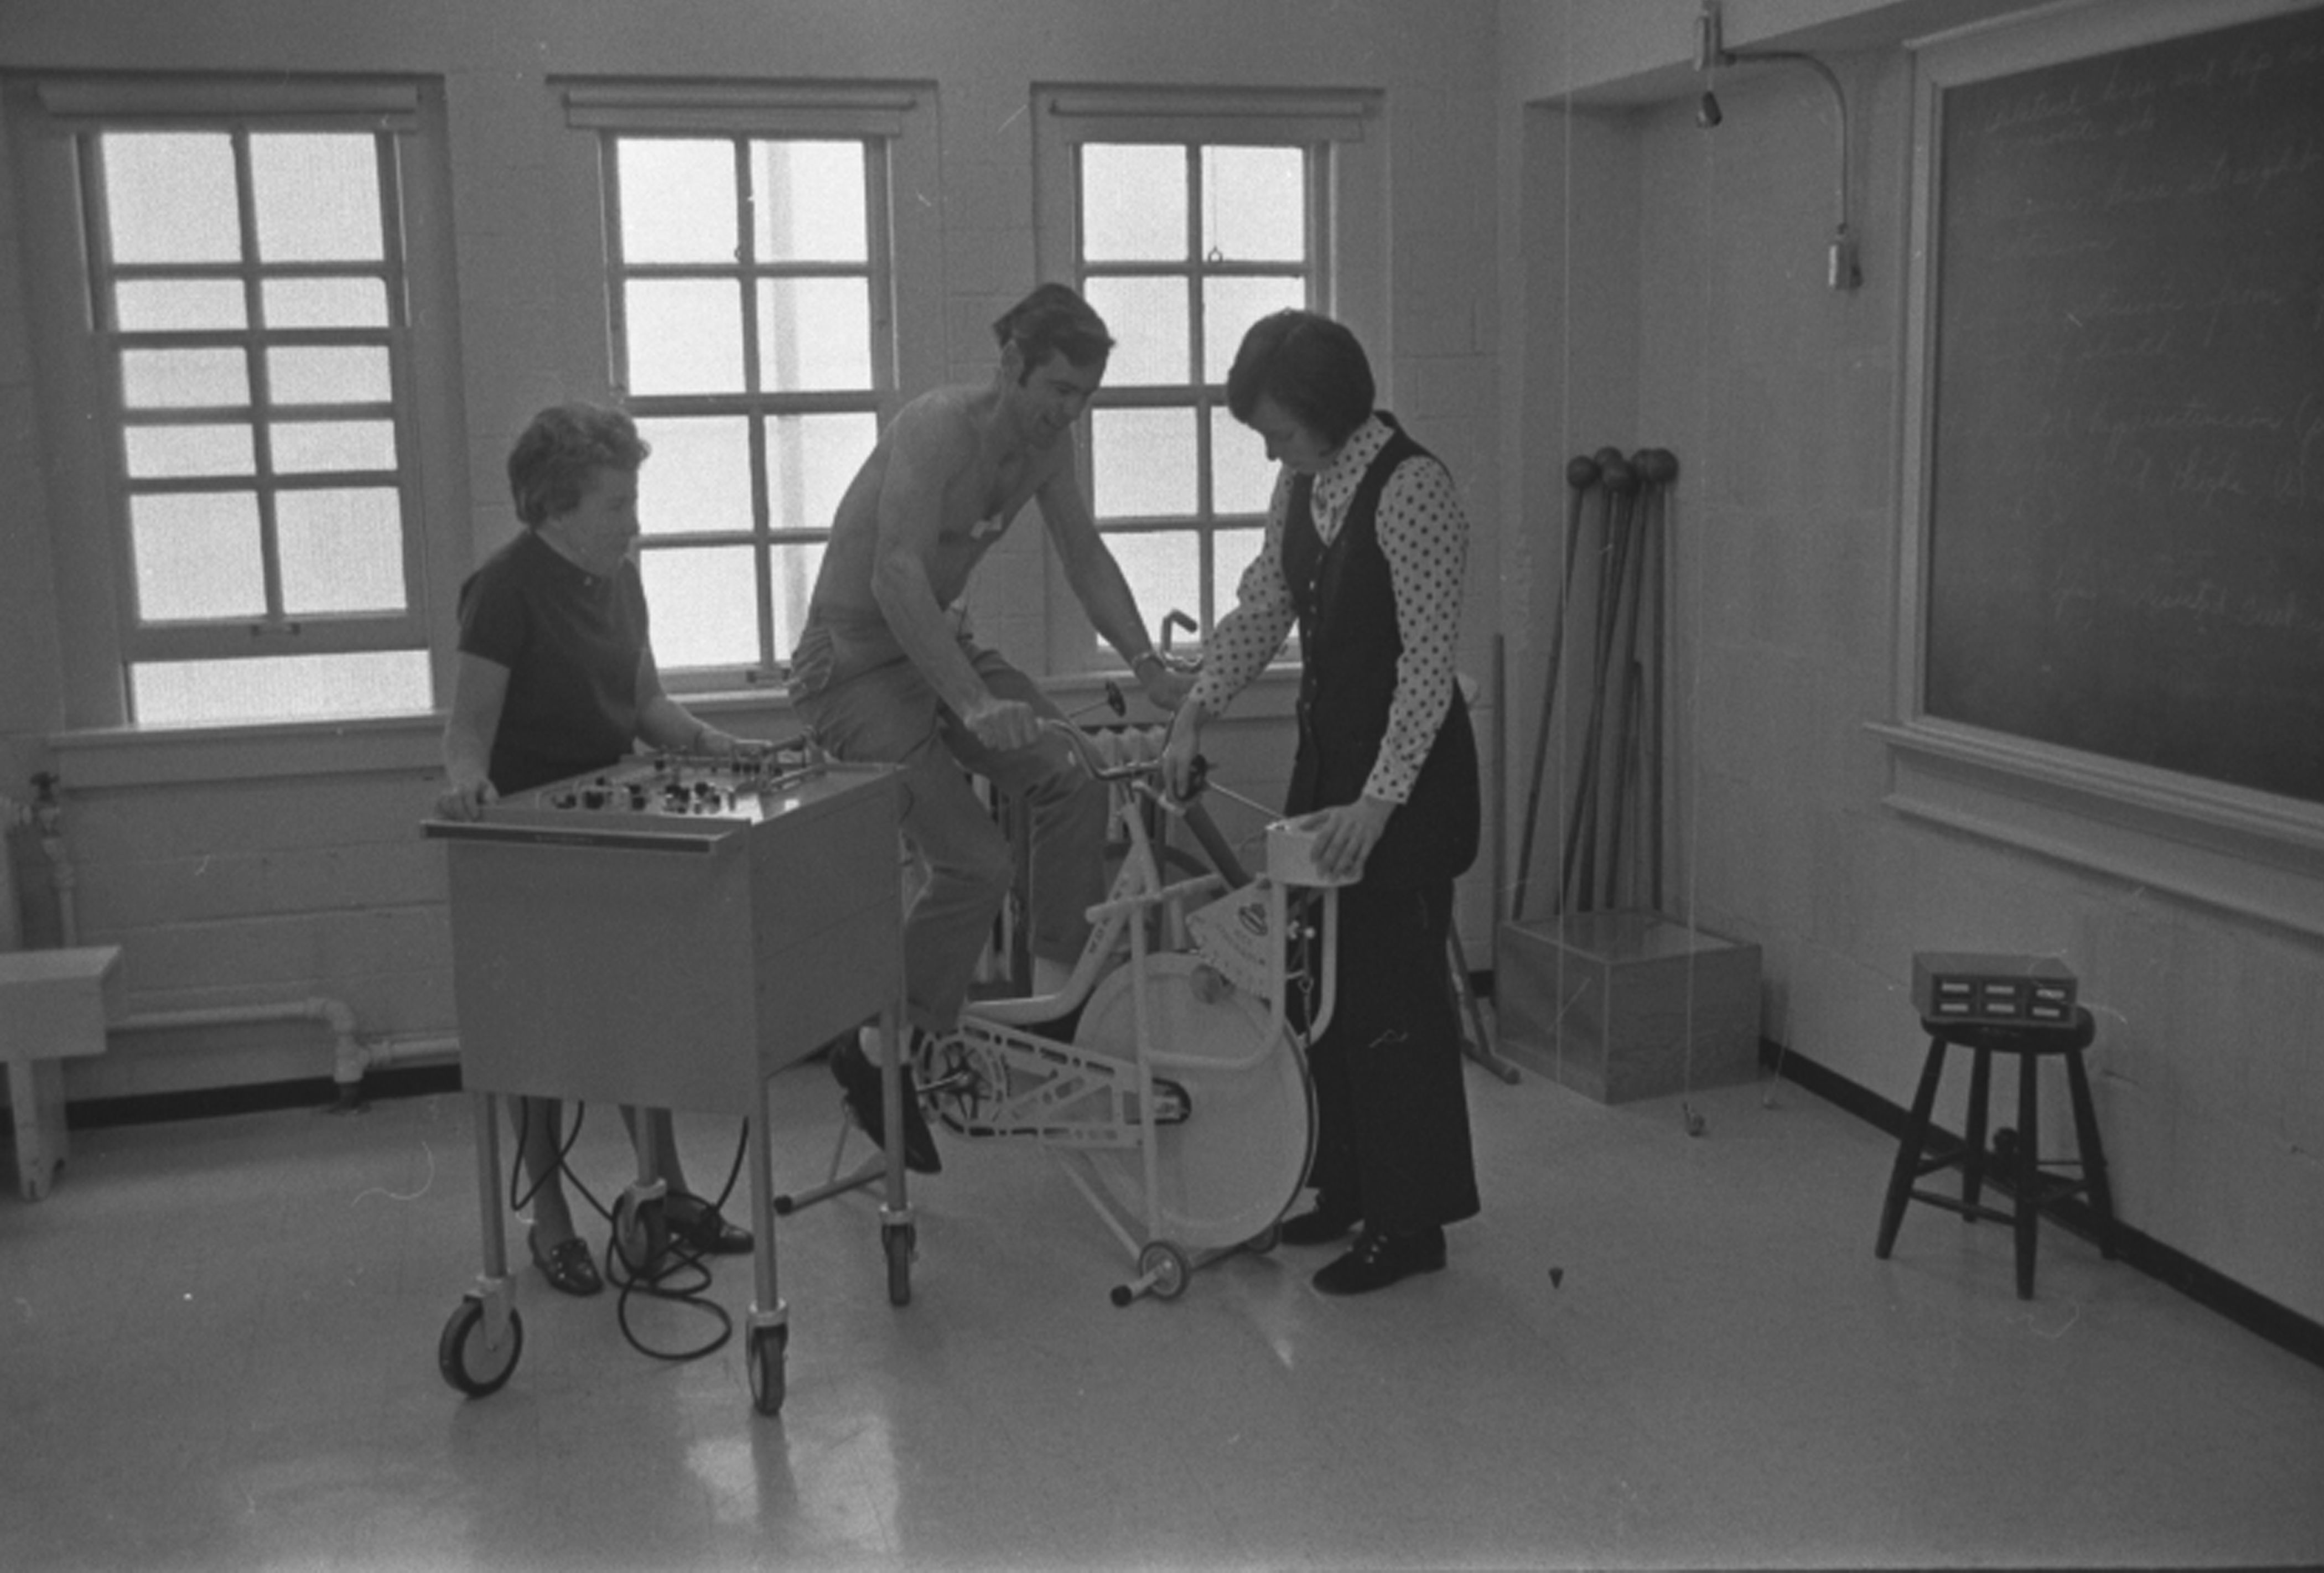 Chappelle Arnett and another person watch a student on a stationary bicycle that is attached to some sort of recording machine in 1971.